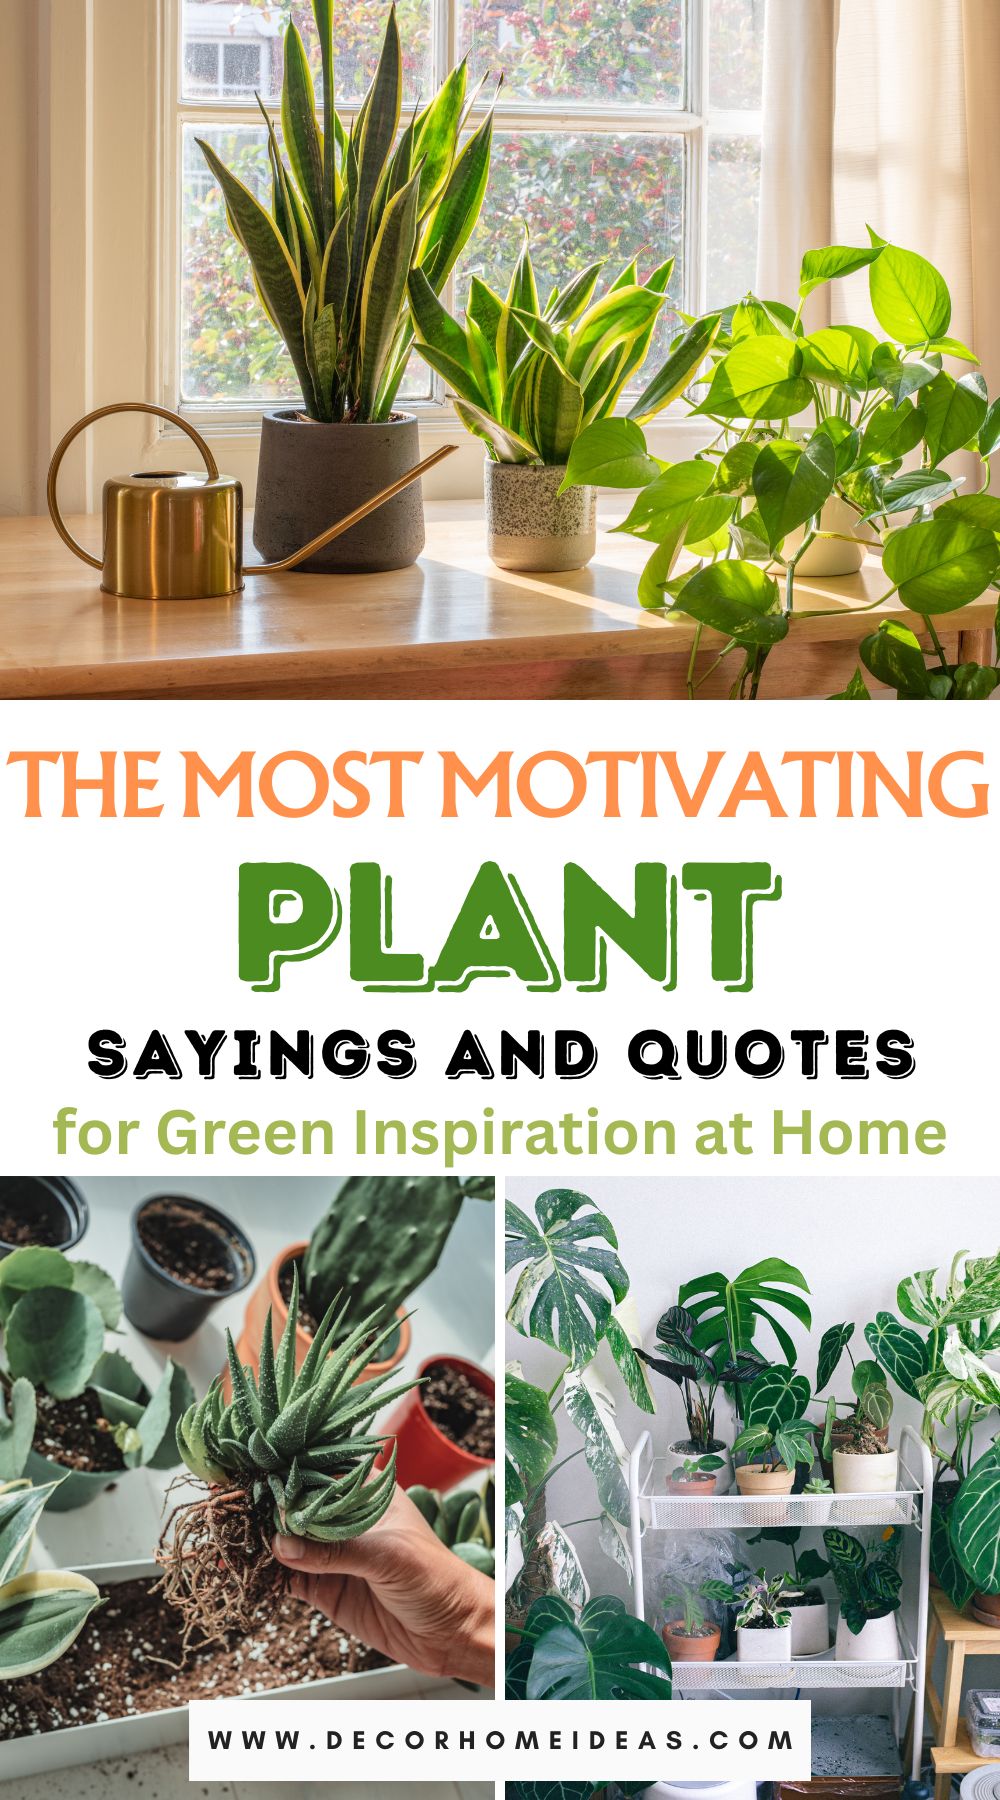 Discover the perfect words to fuel your green inspiration at home with our collection of the most motivating indoor plant sayings and quotes. Transform your space into a botanical haven with uplifting phrases that celebrate the beauty and positivity of indoor plants.